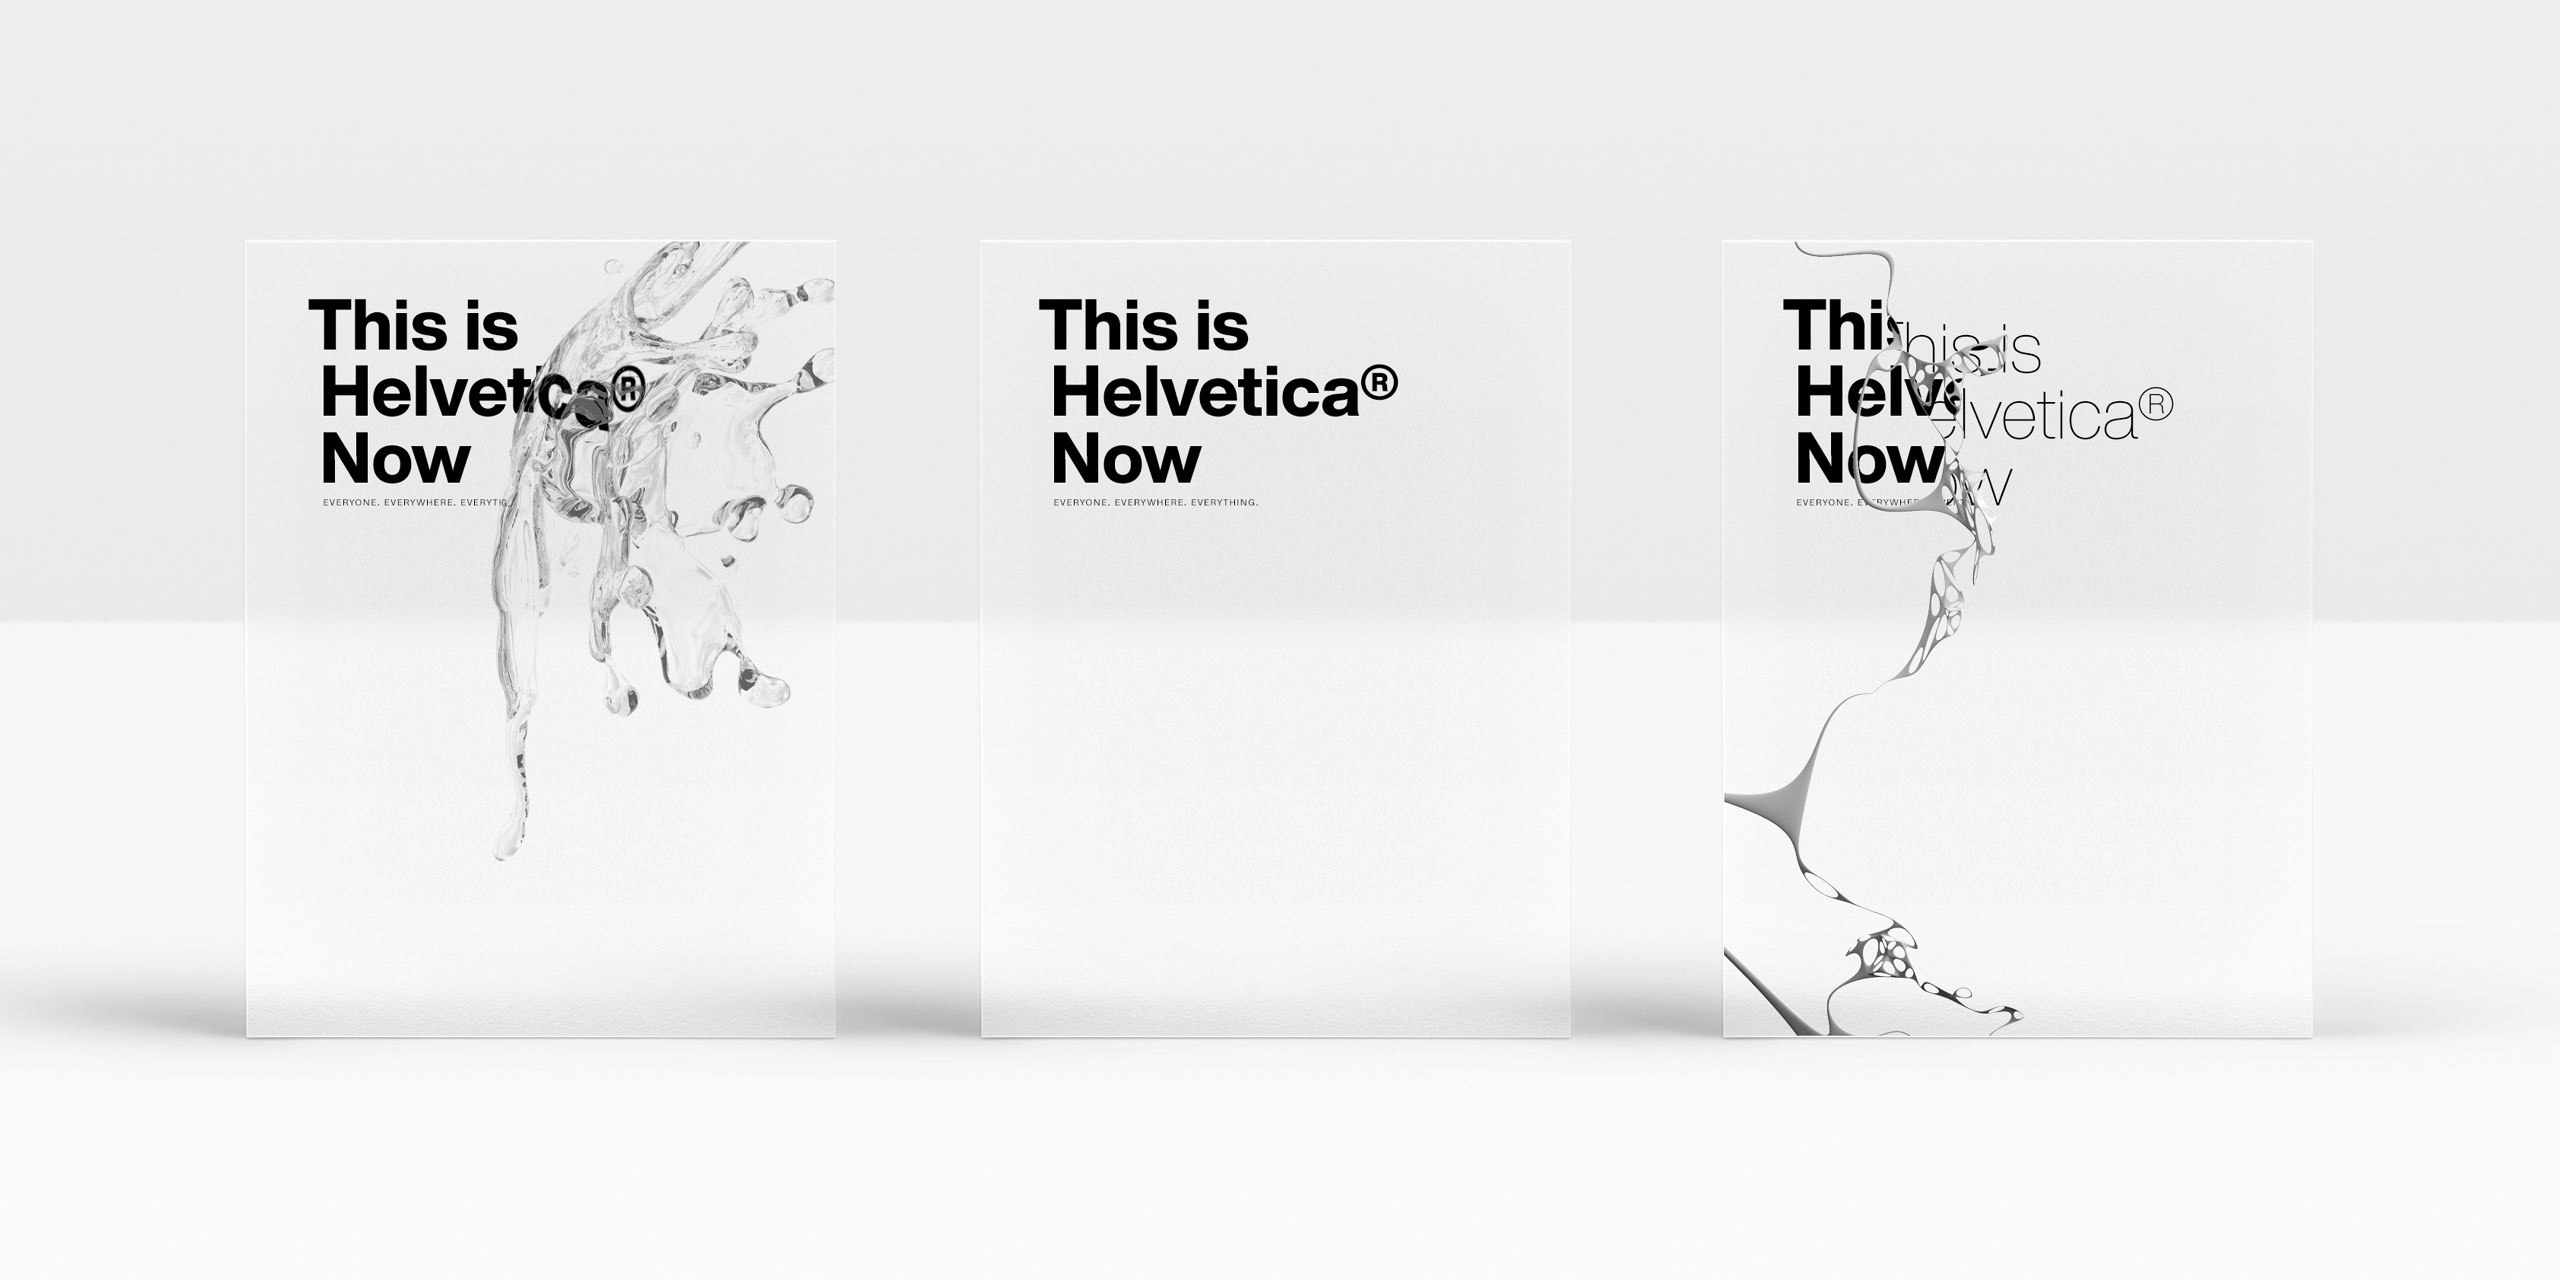 why helvetica now